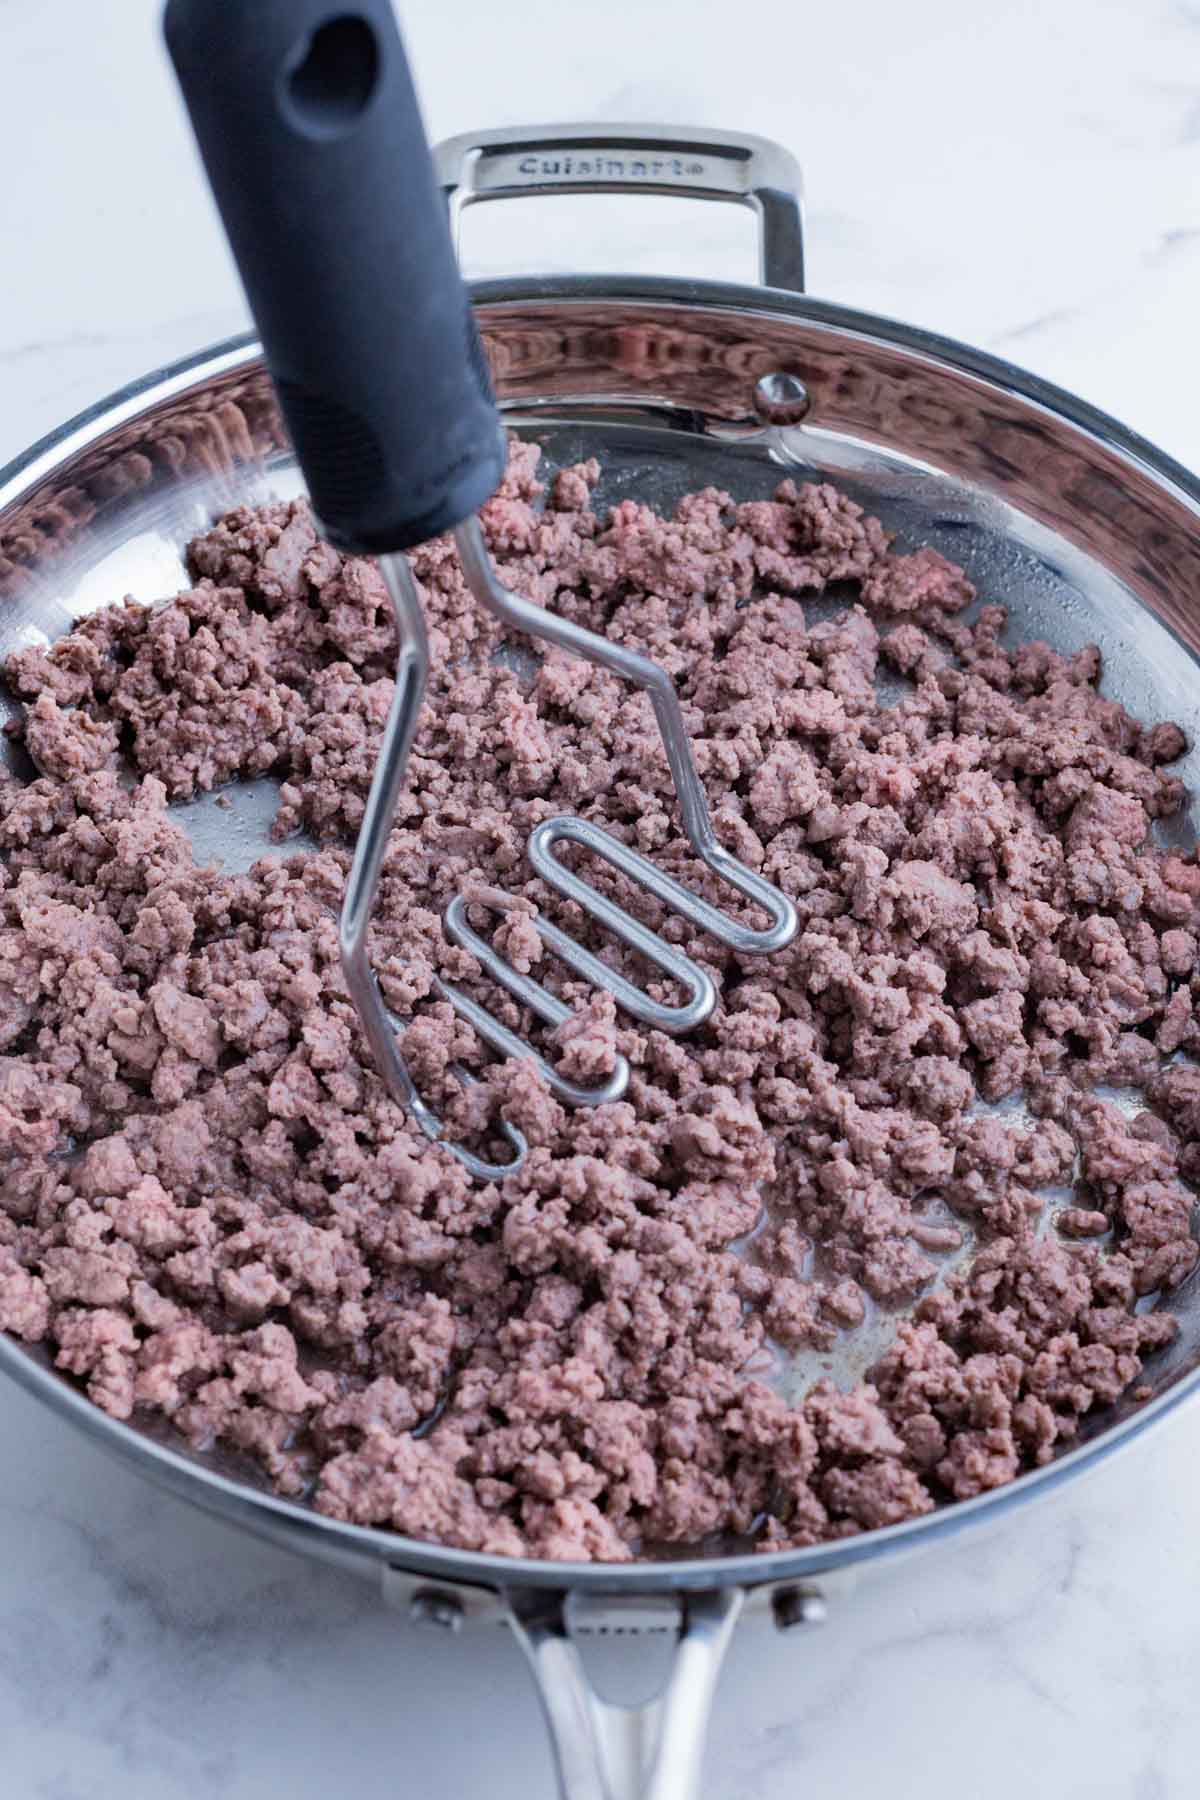 Ground beef is cooked in a skillet.